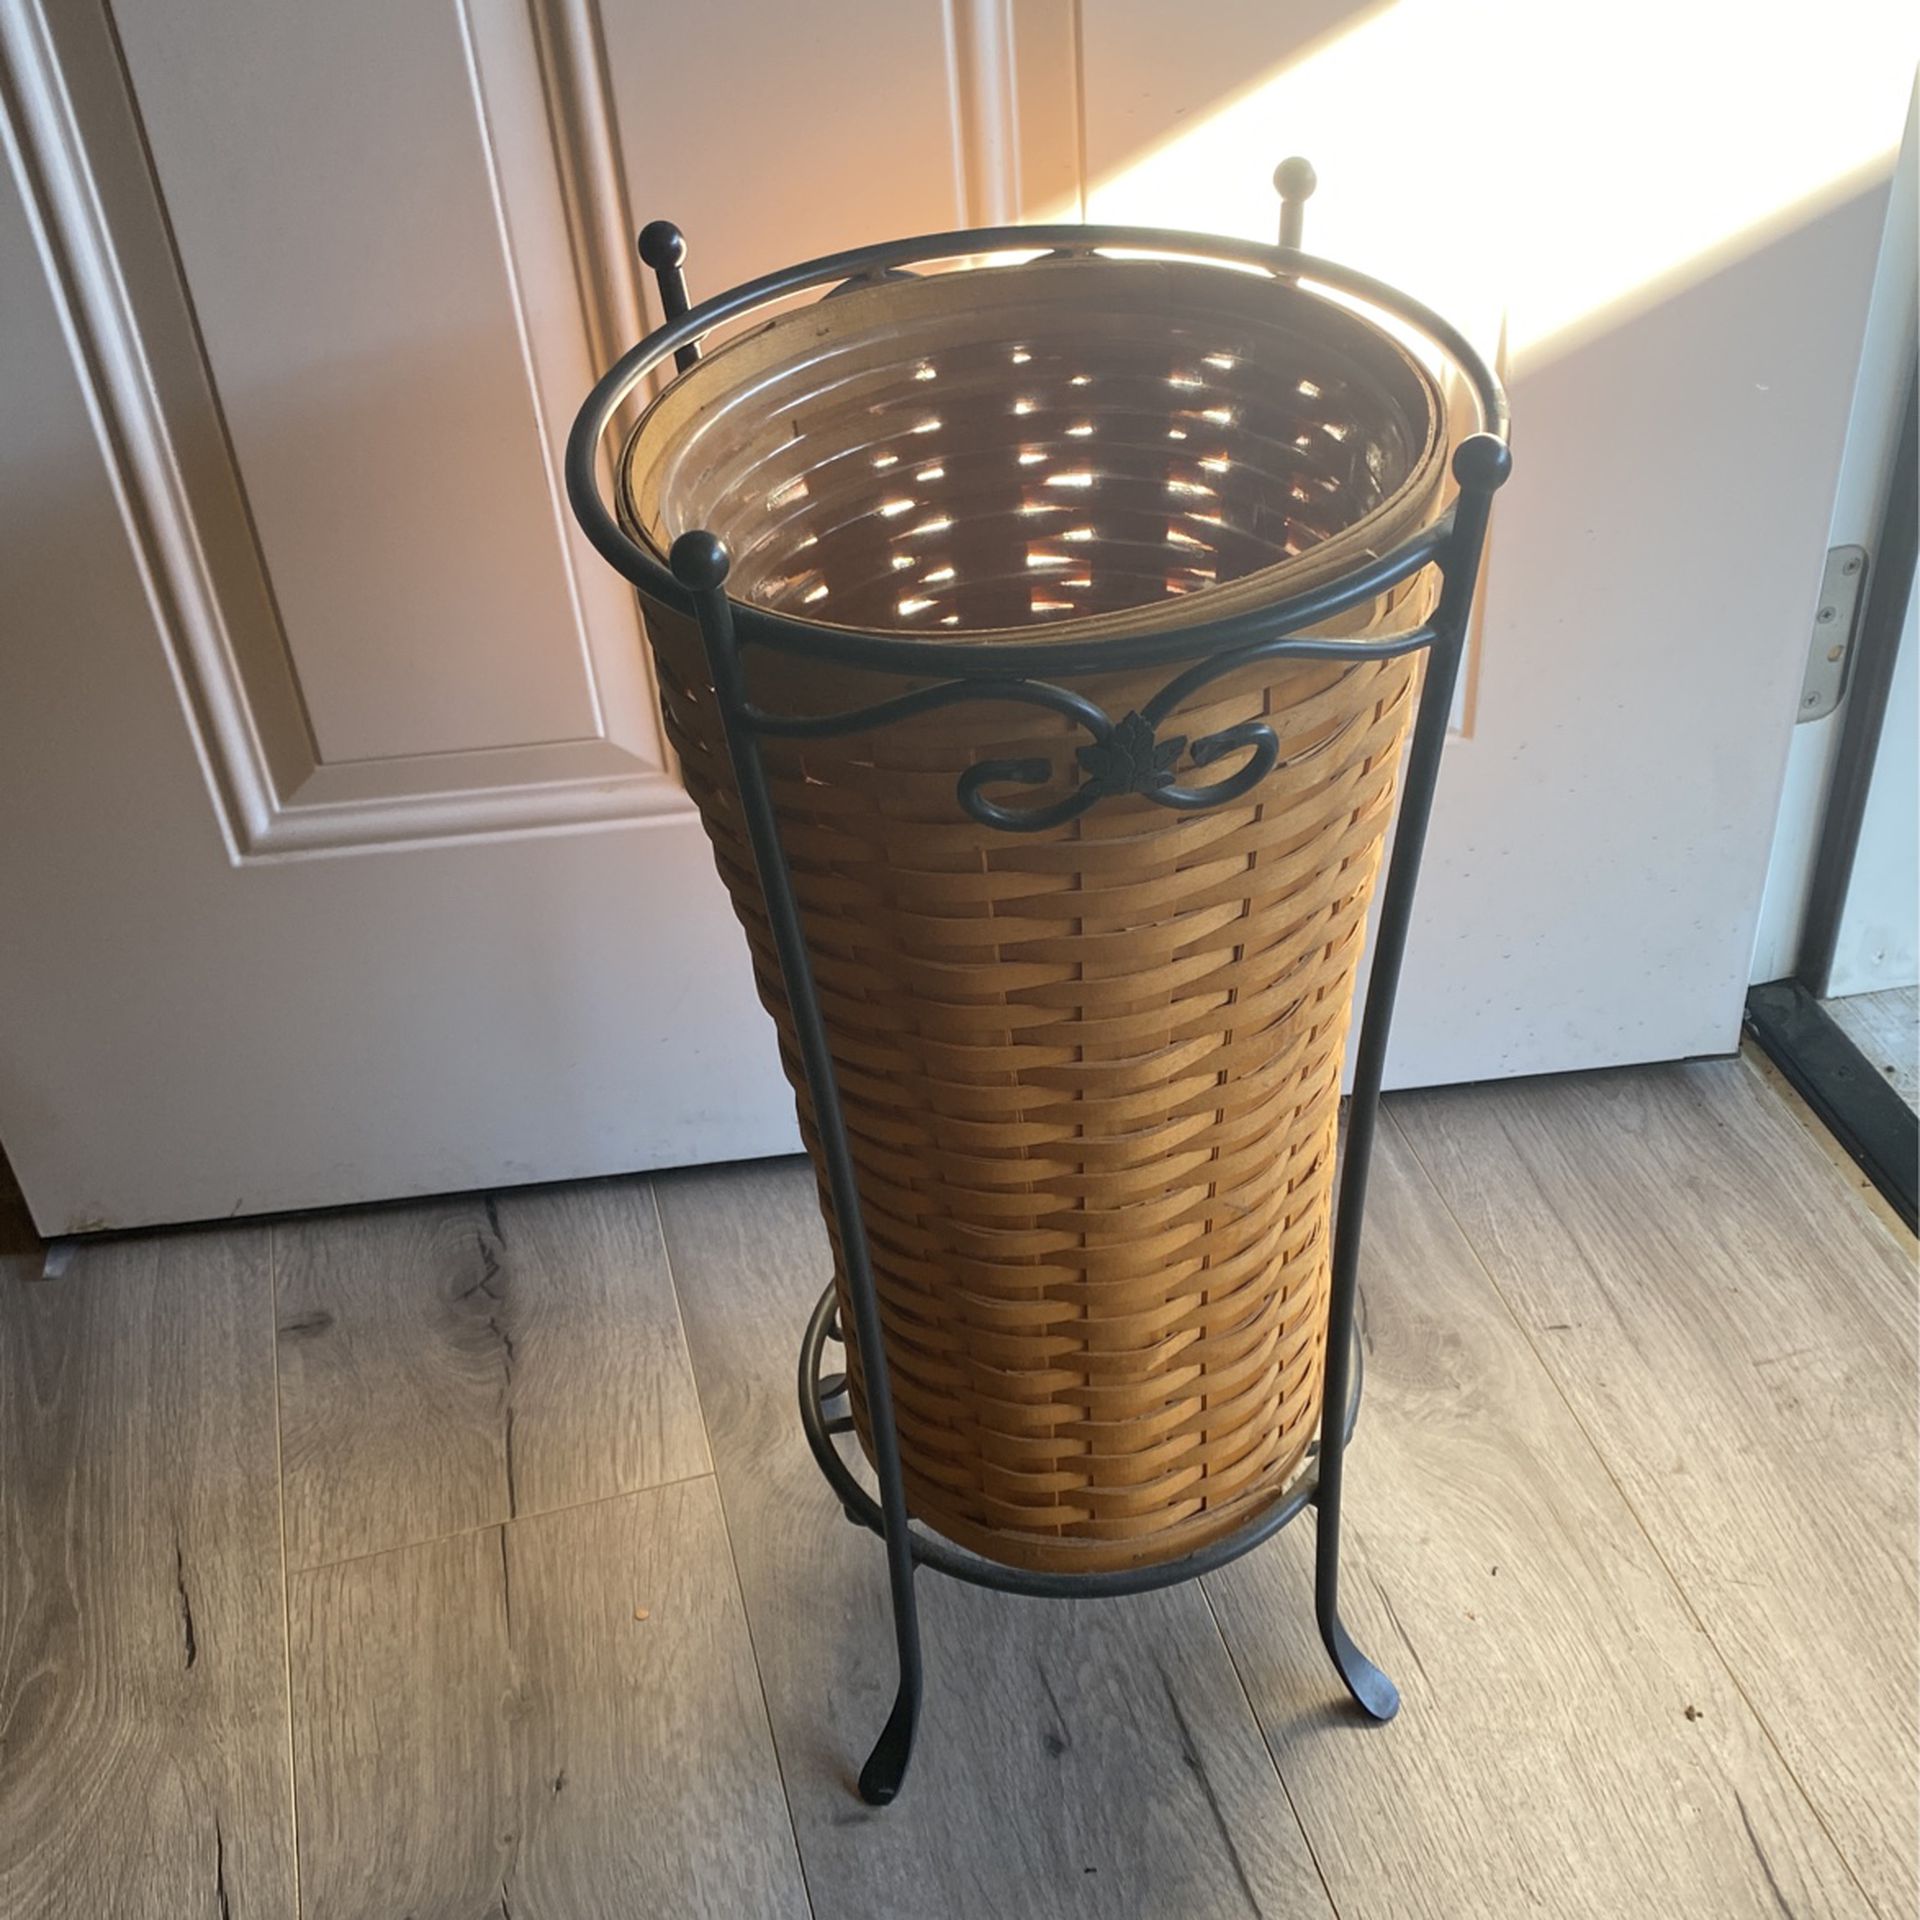 Longaberger Umbrella Basket . Comes With Plastic Lining to protect wooden basket